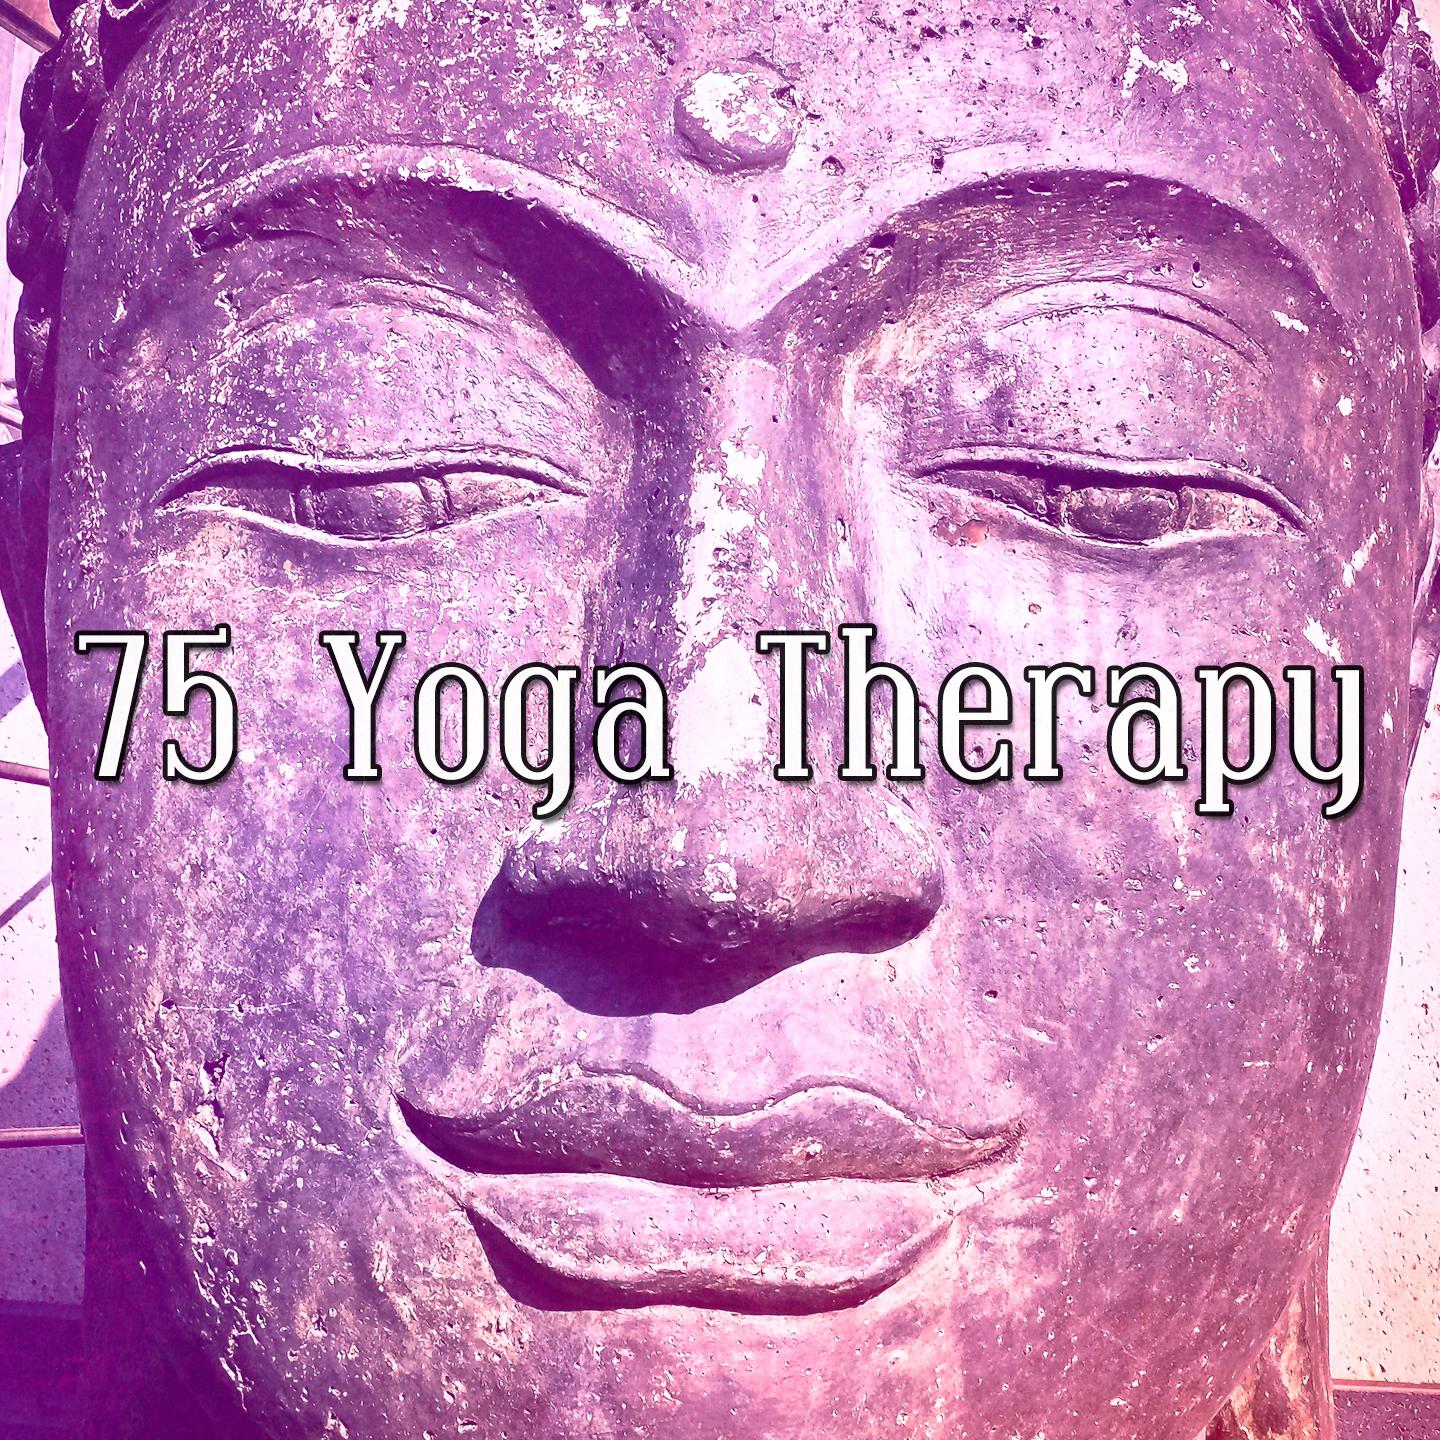 75 Yoga Therapy